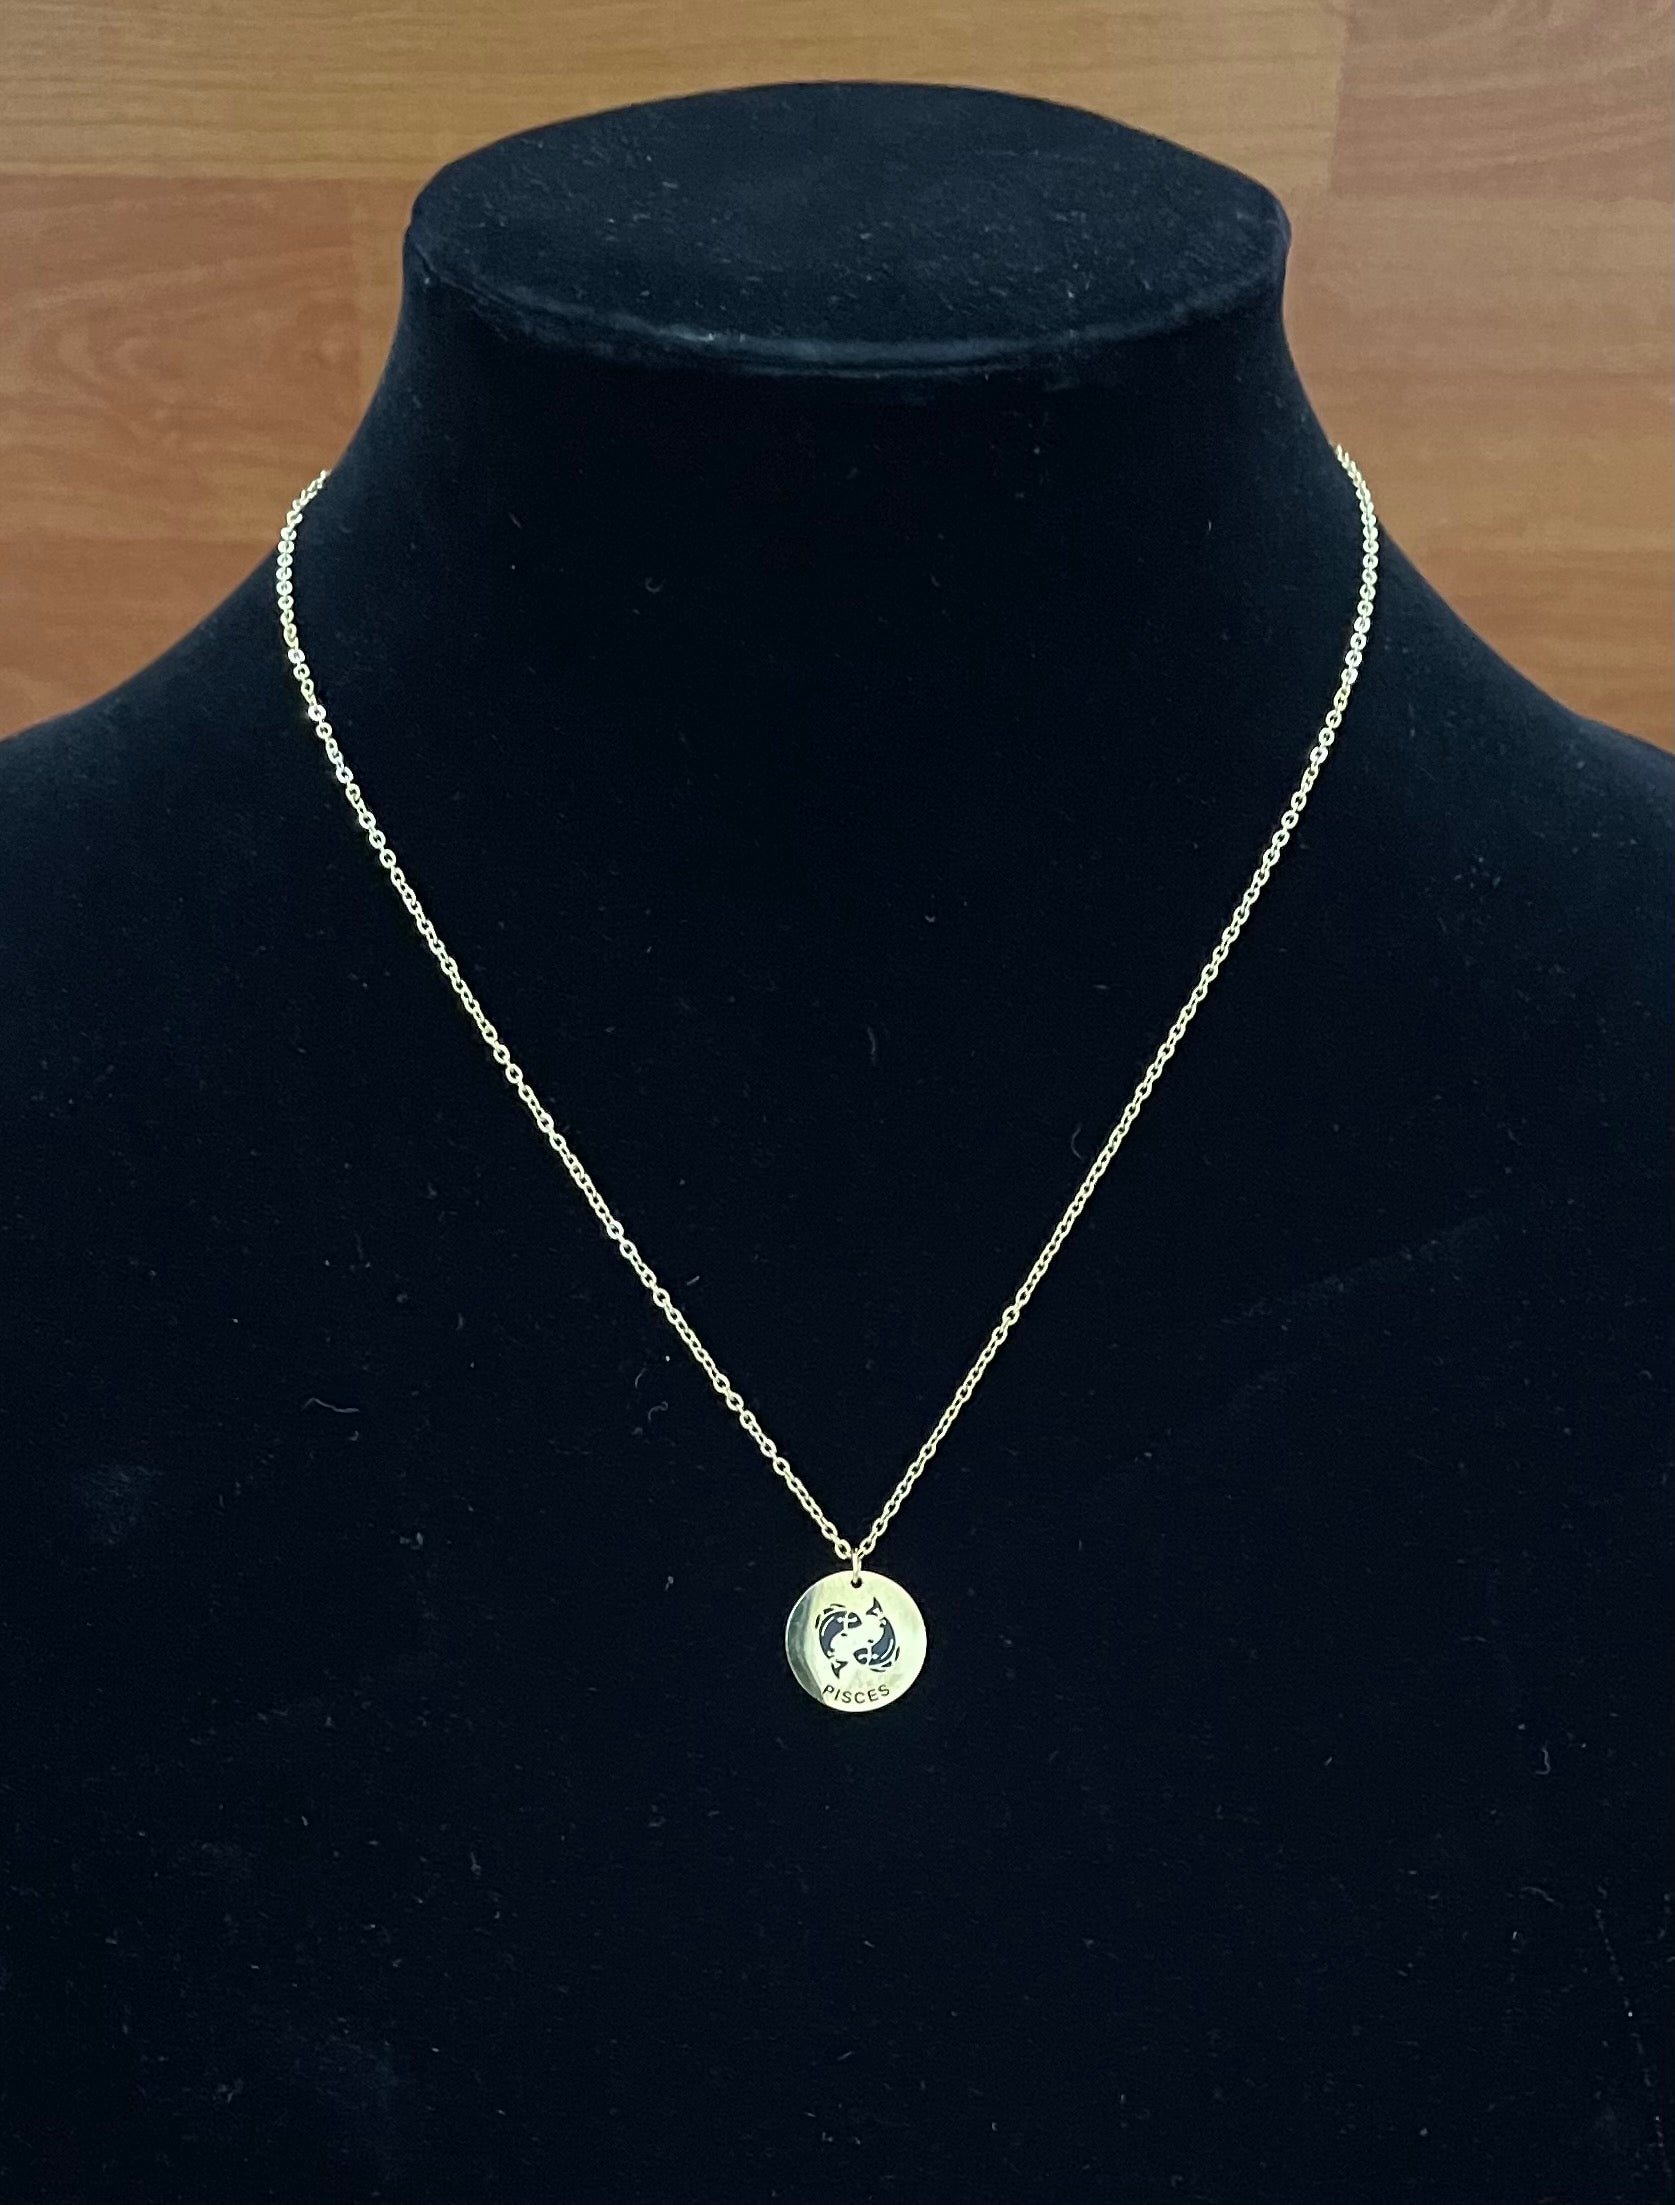 Zodiac Necklaces in Stainless Steel